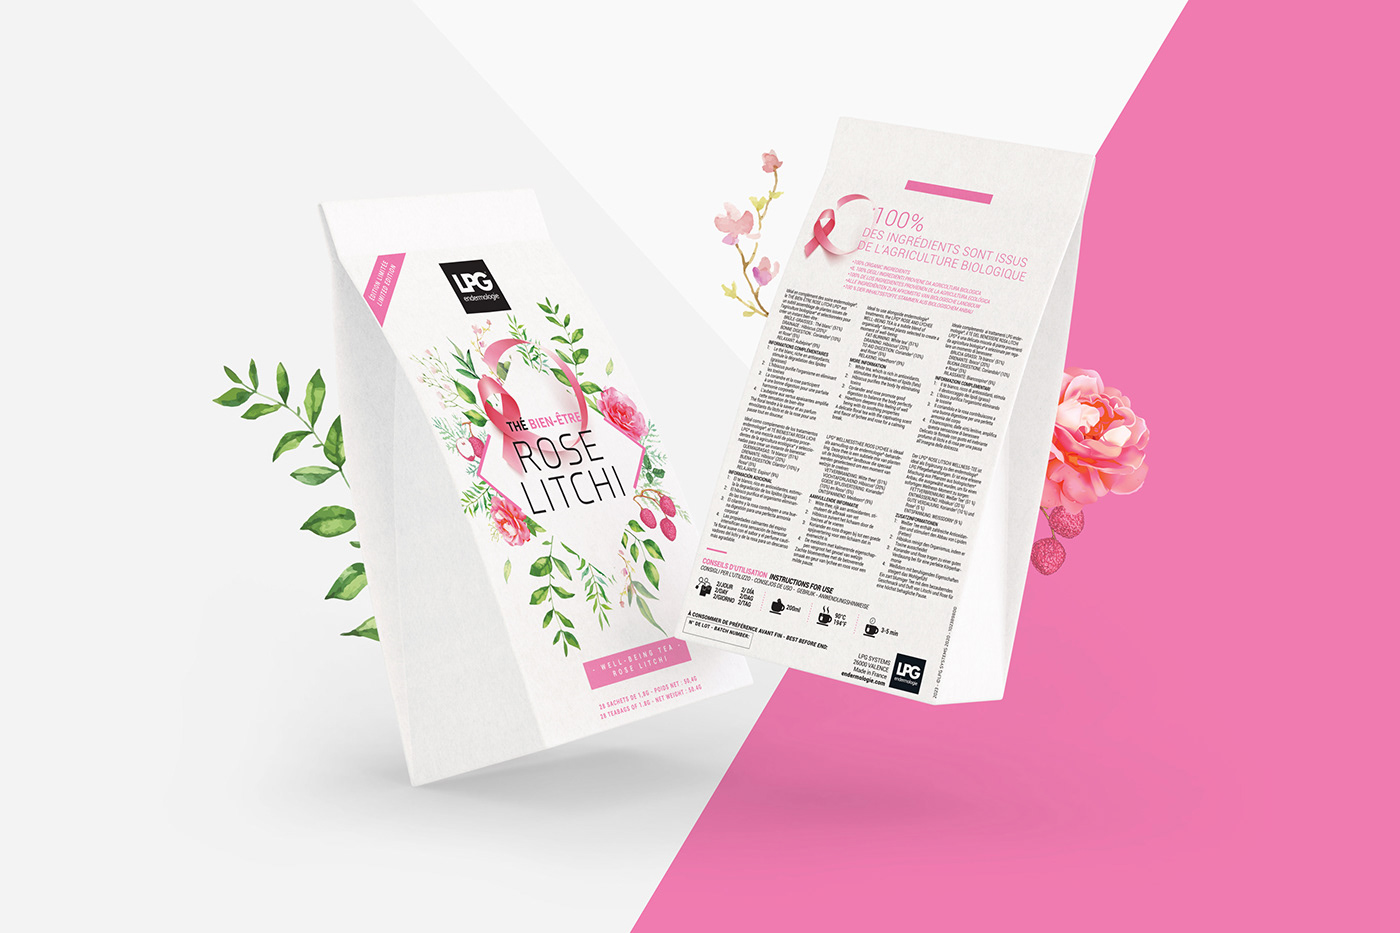 Design Graphic flower graphism litchi ornement Packaging rose tea the